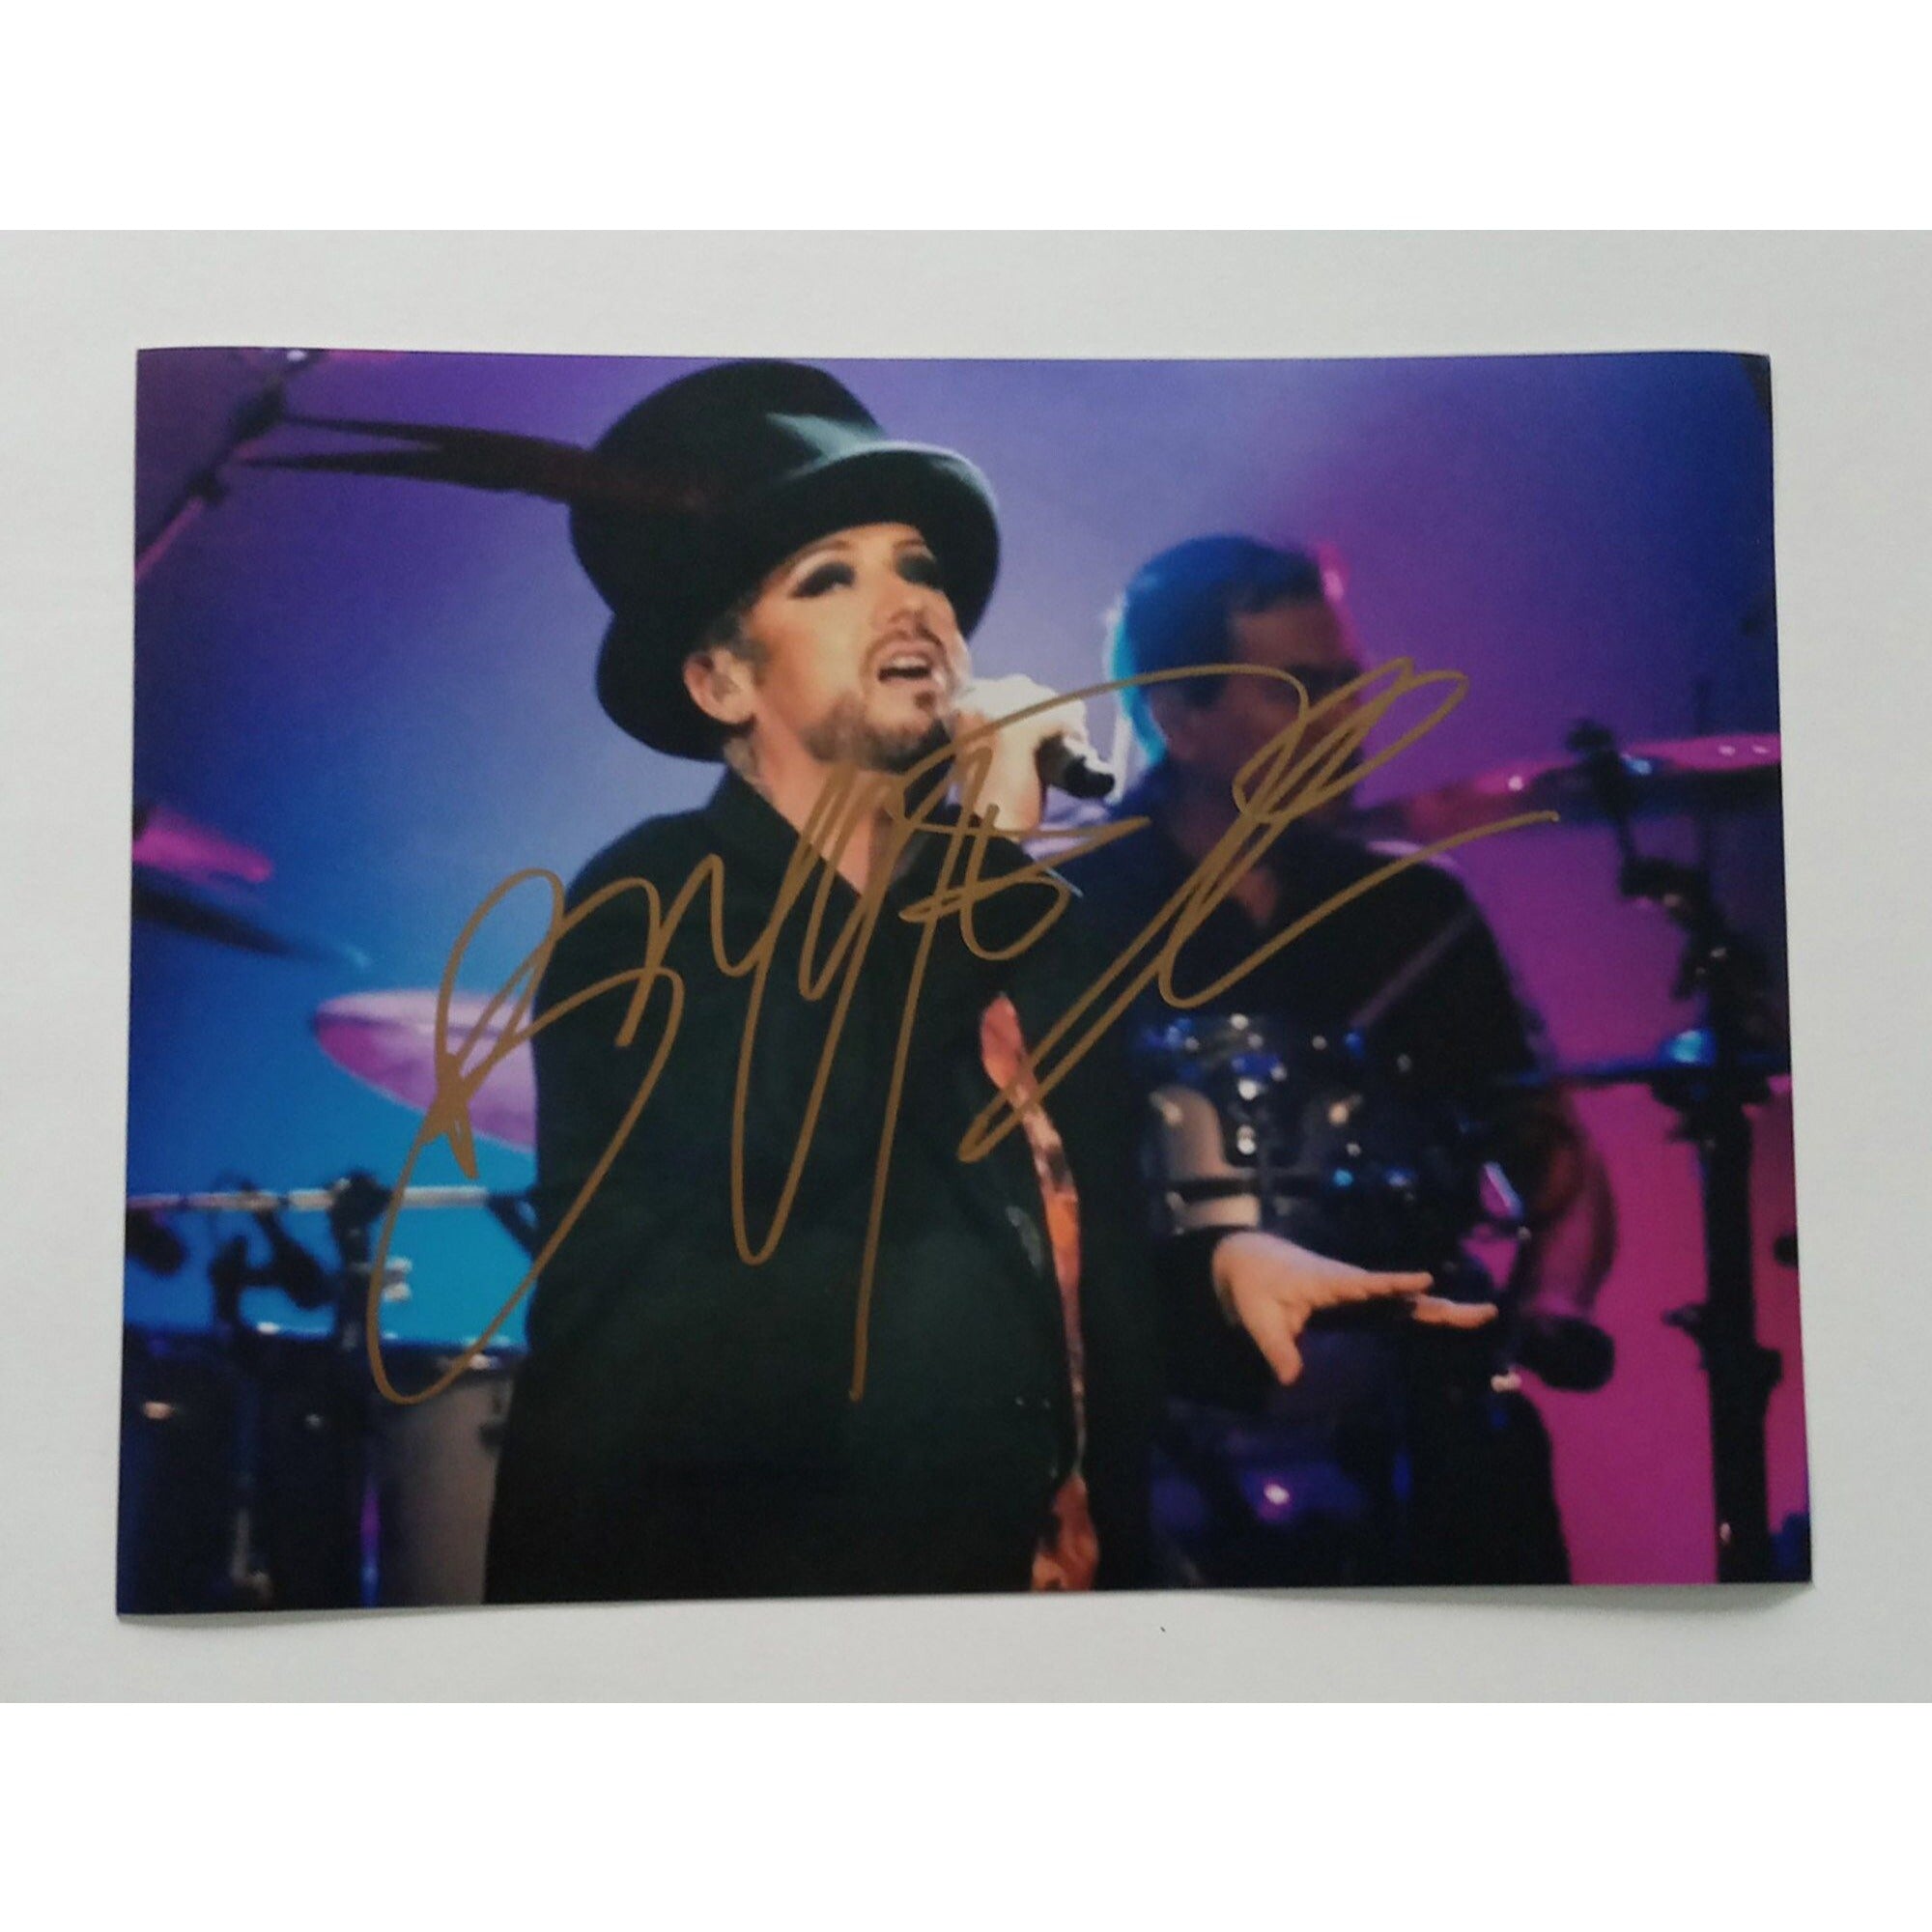 George O'Dowd Culture Club Boy George 8x10 signed photo with proof